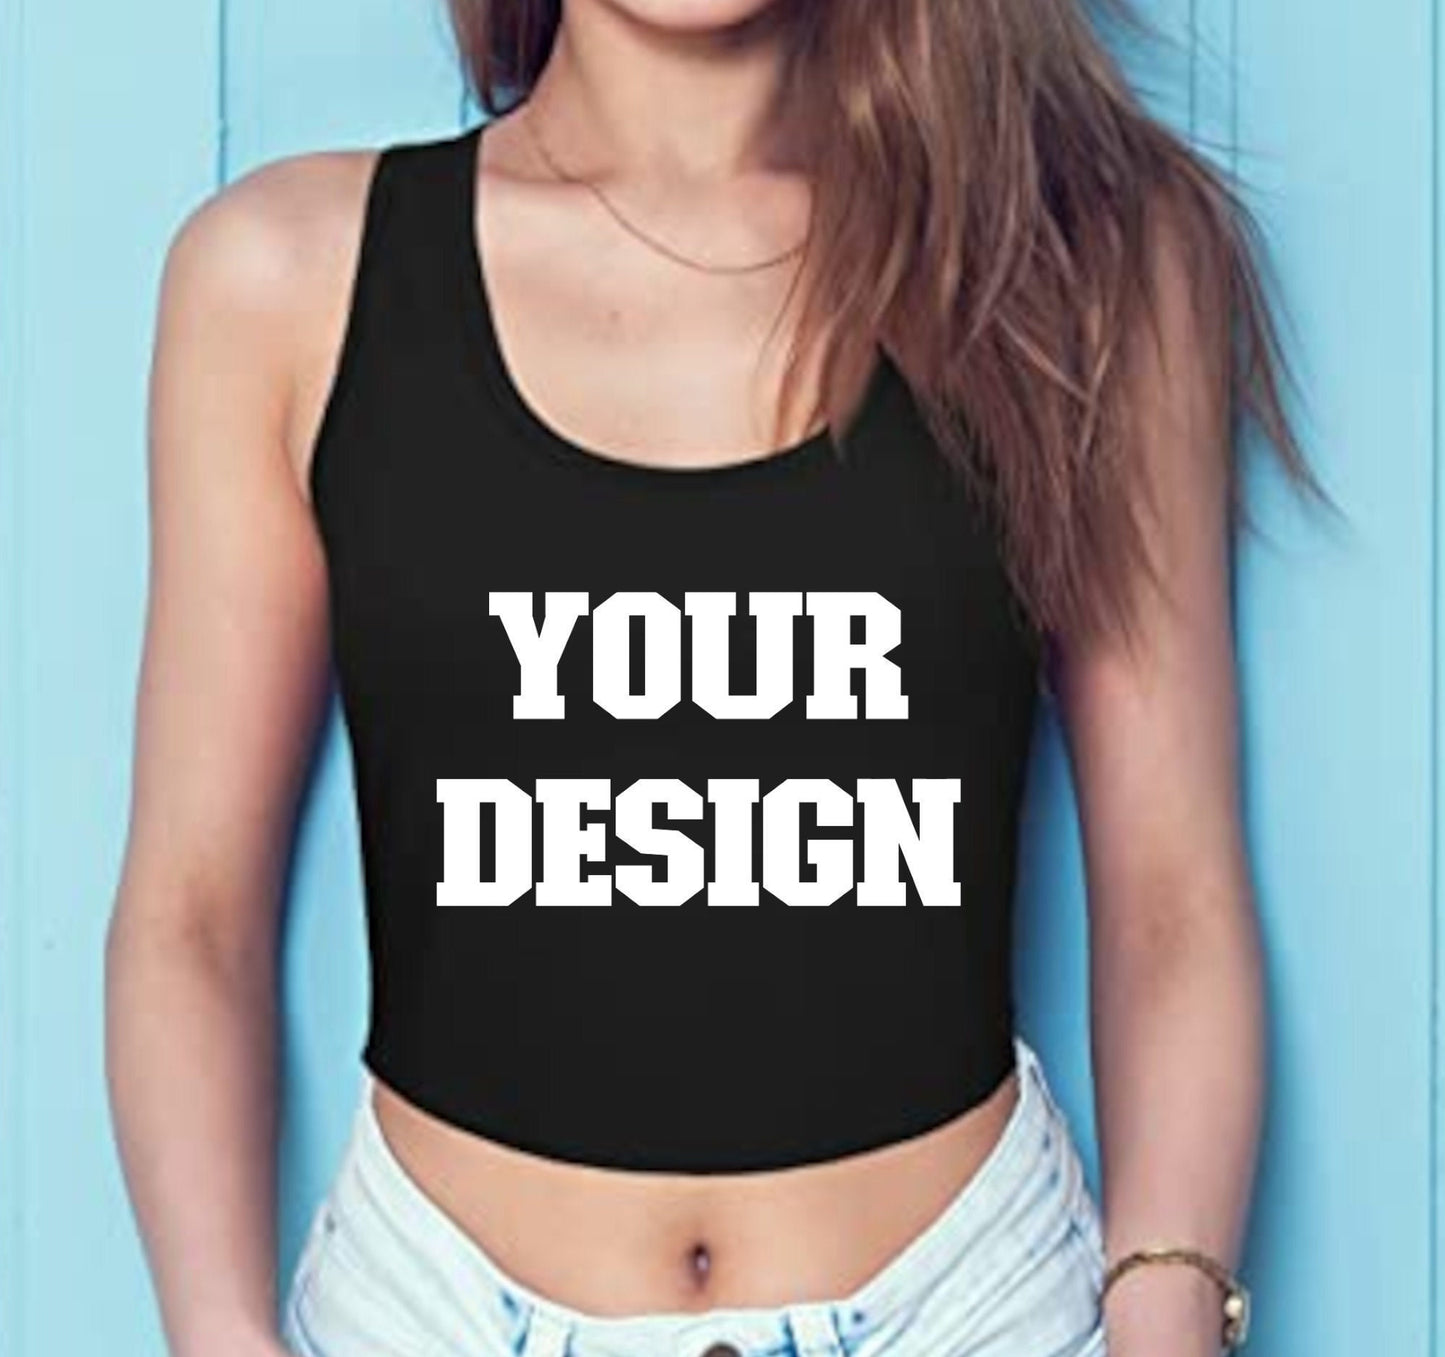 Customize Your Own Cropped Racerback Tank Top With Your Design